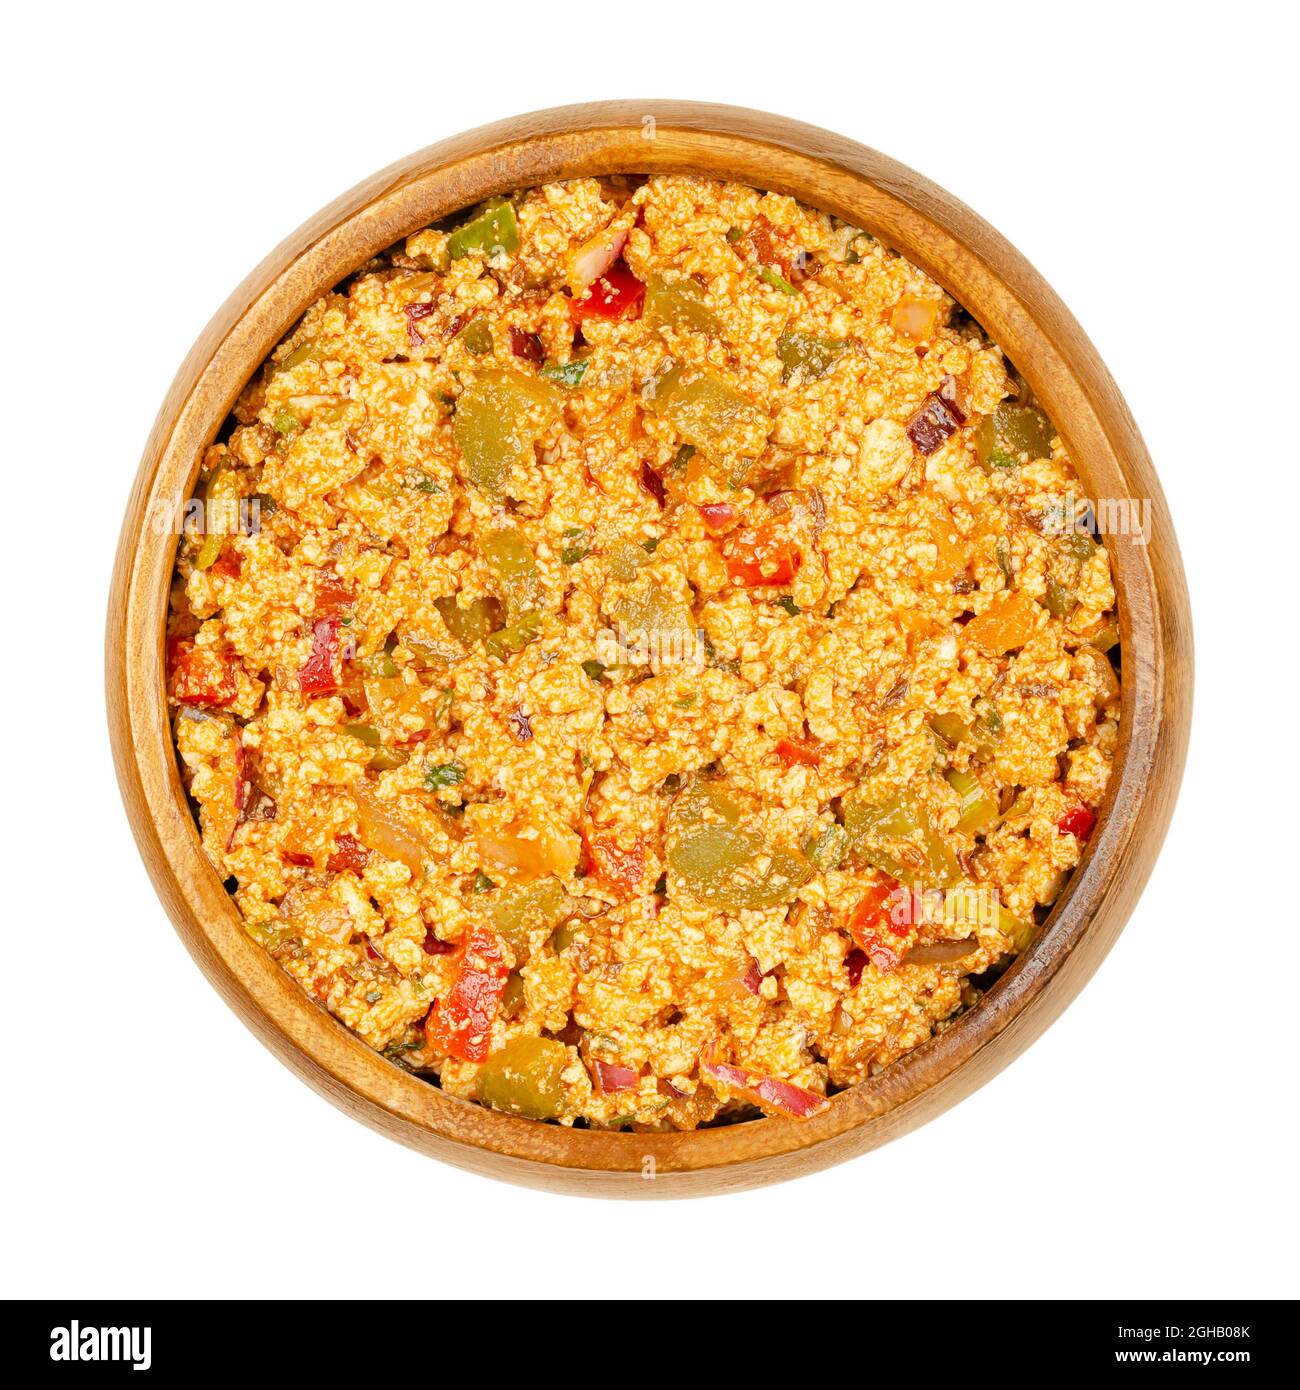 Vegan Liptauer bread spread, in a wooden bowl. Spicy spread, made of crumbled white tofu, red peppers, gherkins, onions and spices. Stock Photo